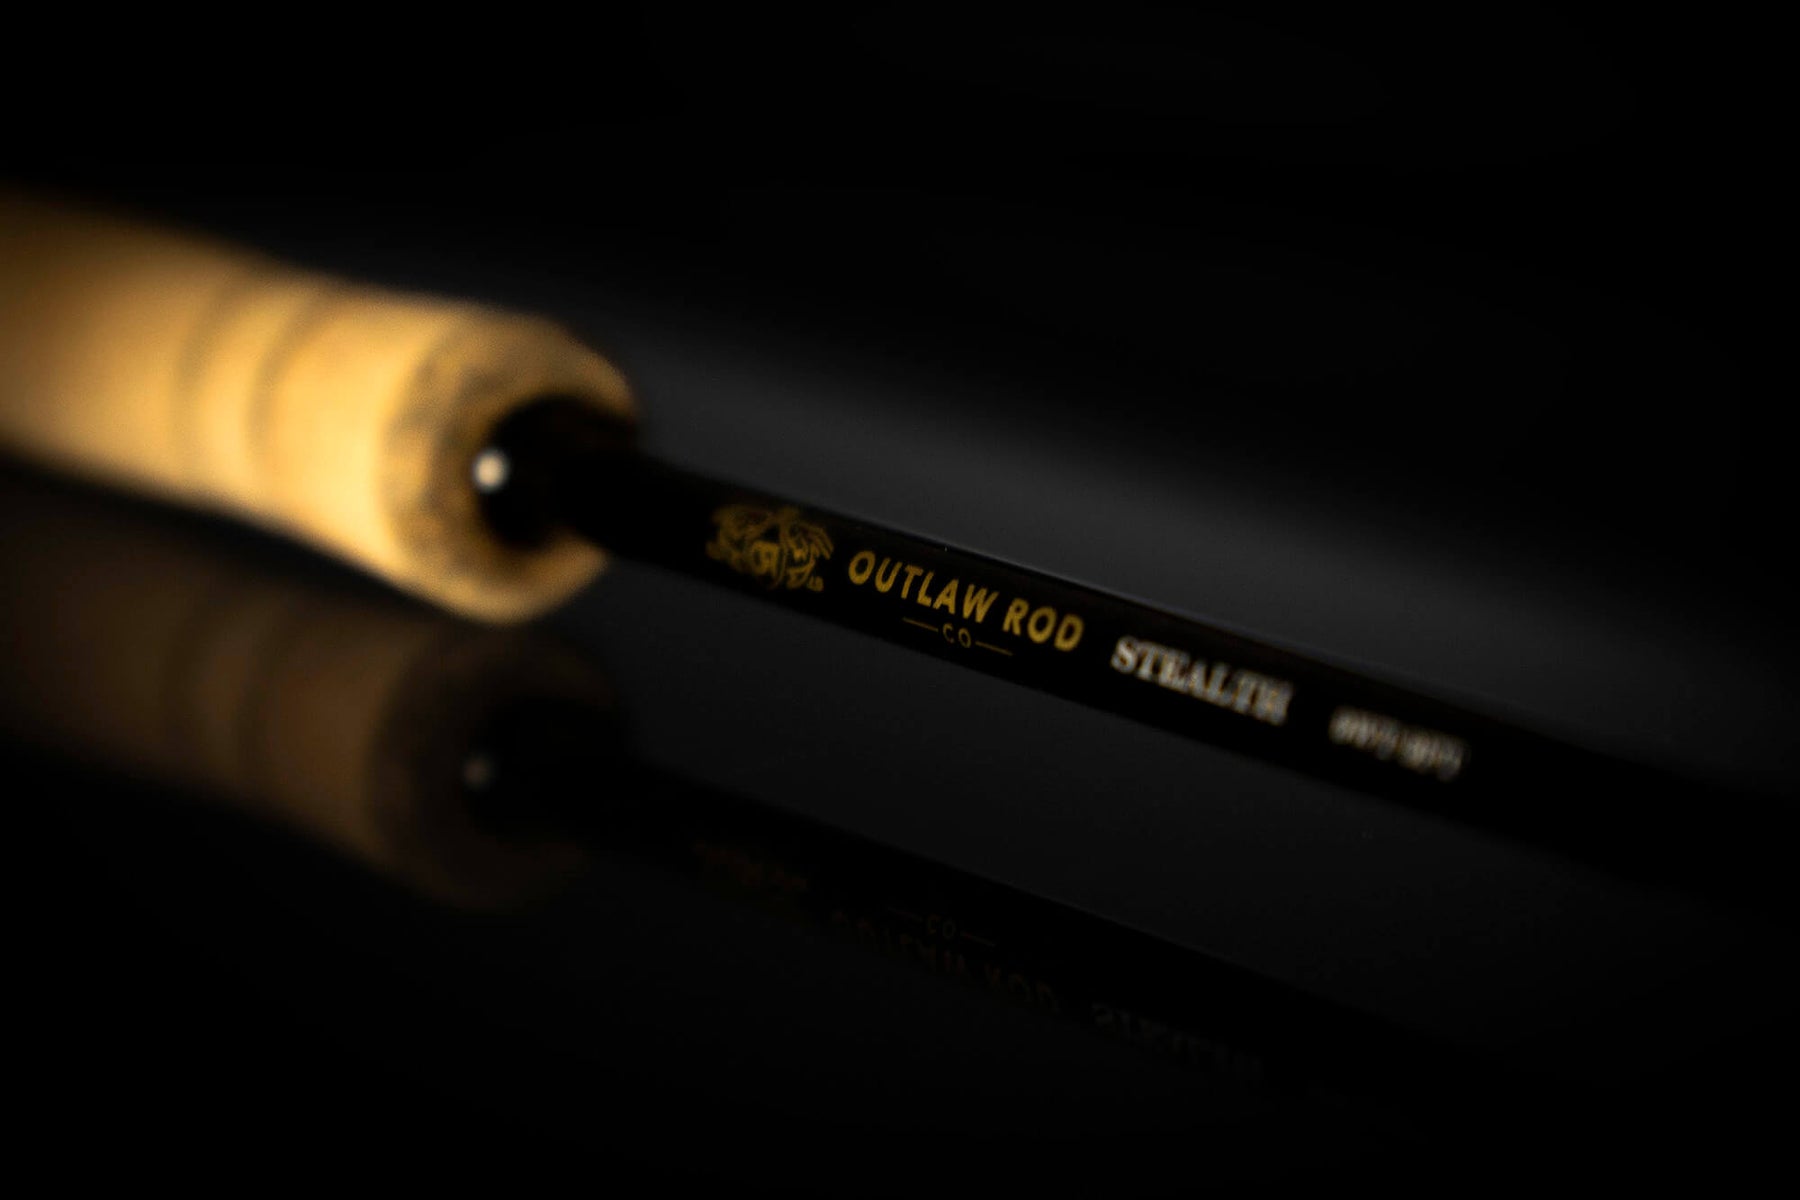 Stealth Edition- 8wt 9ft – Outlaw Rod Co.